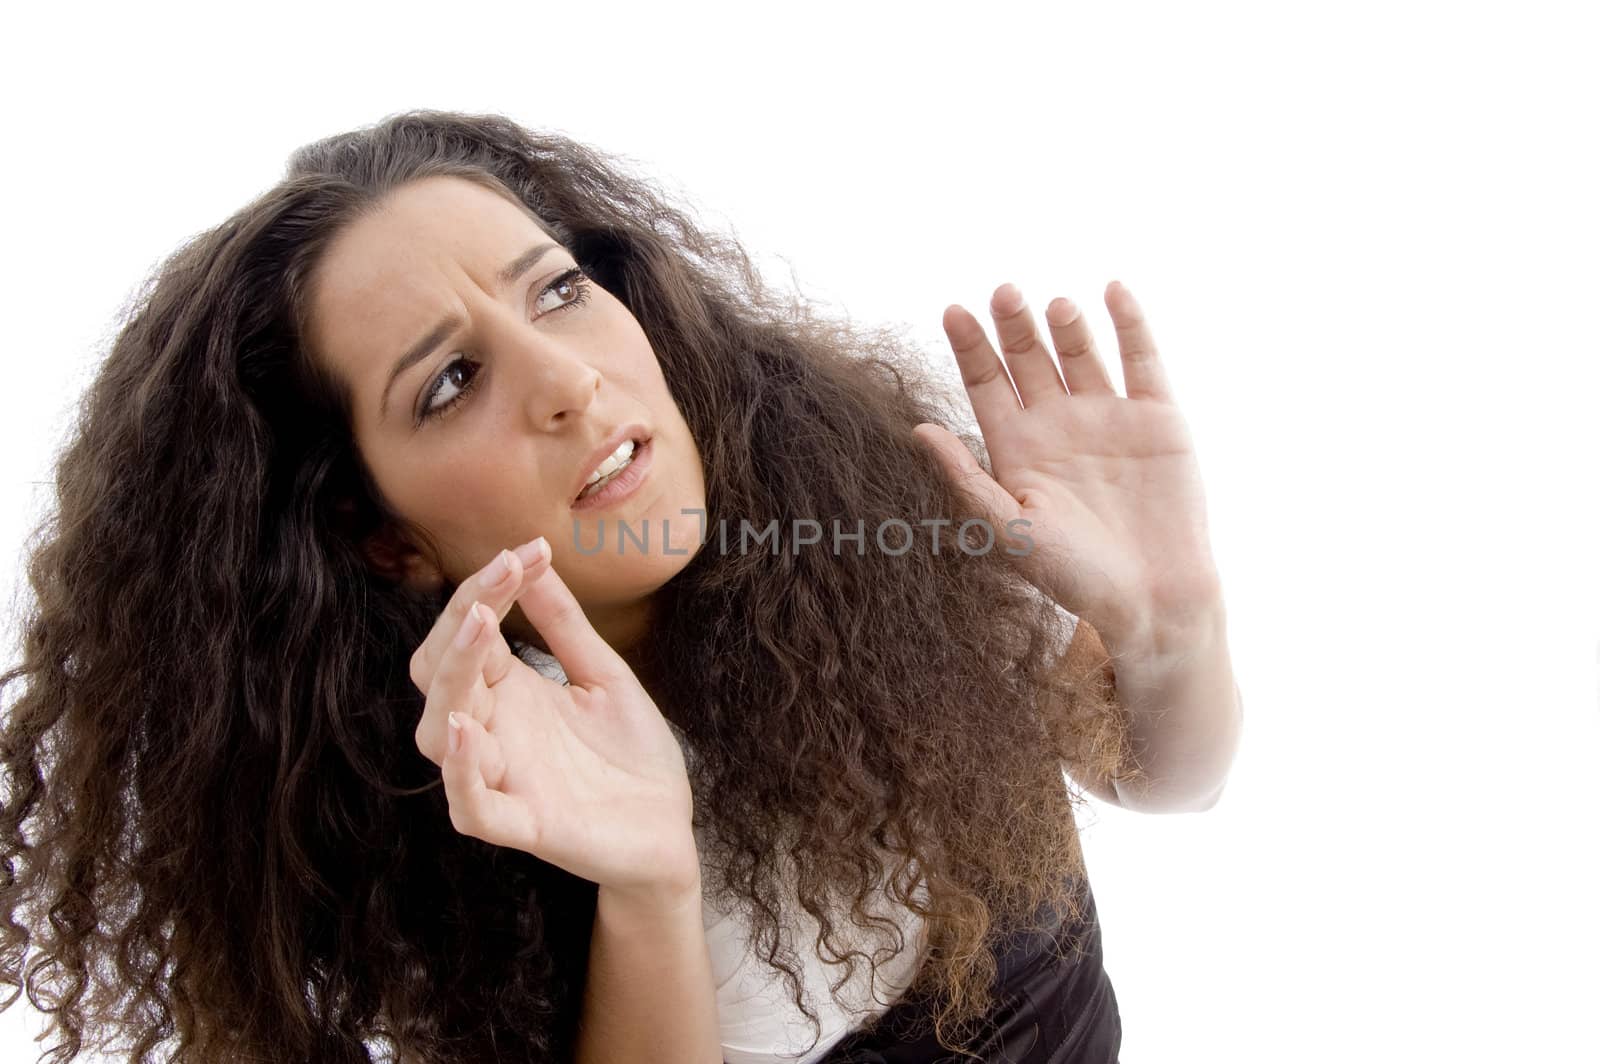 latin american female surprised after looking upwards on an isolated white background